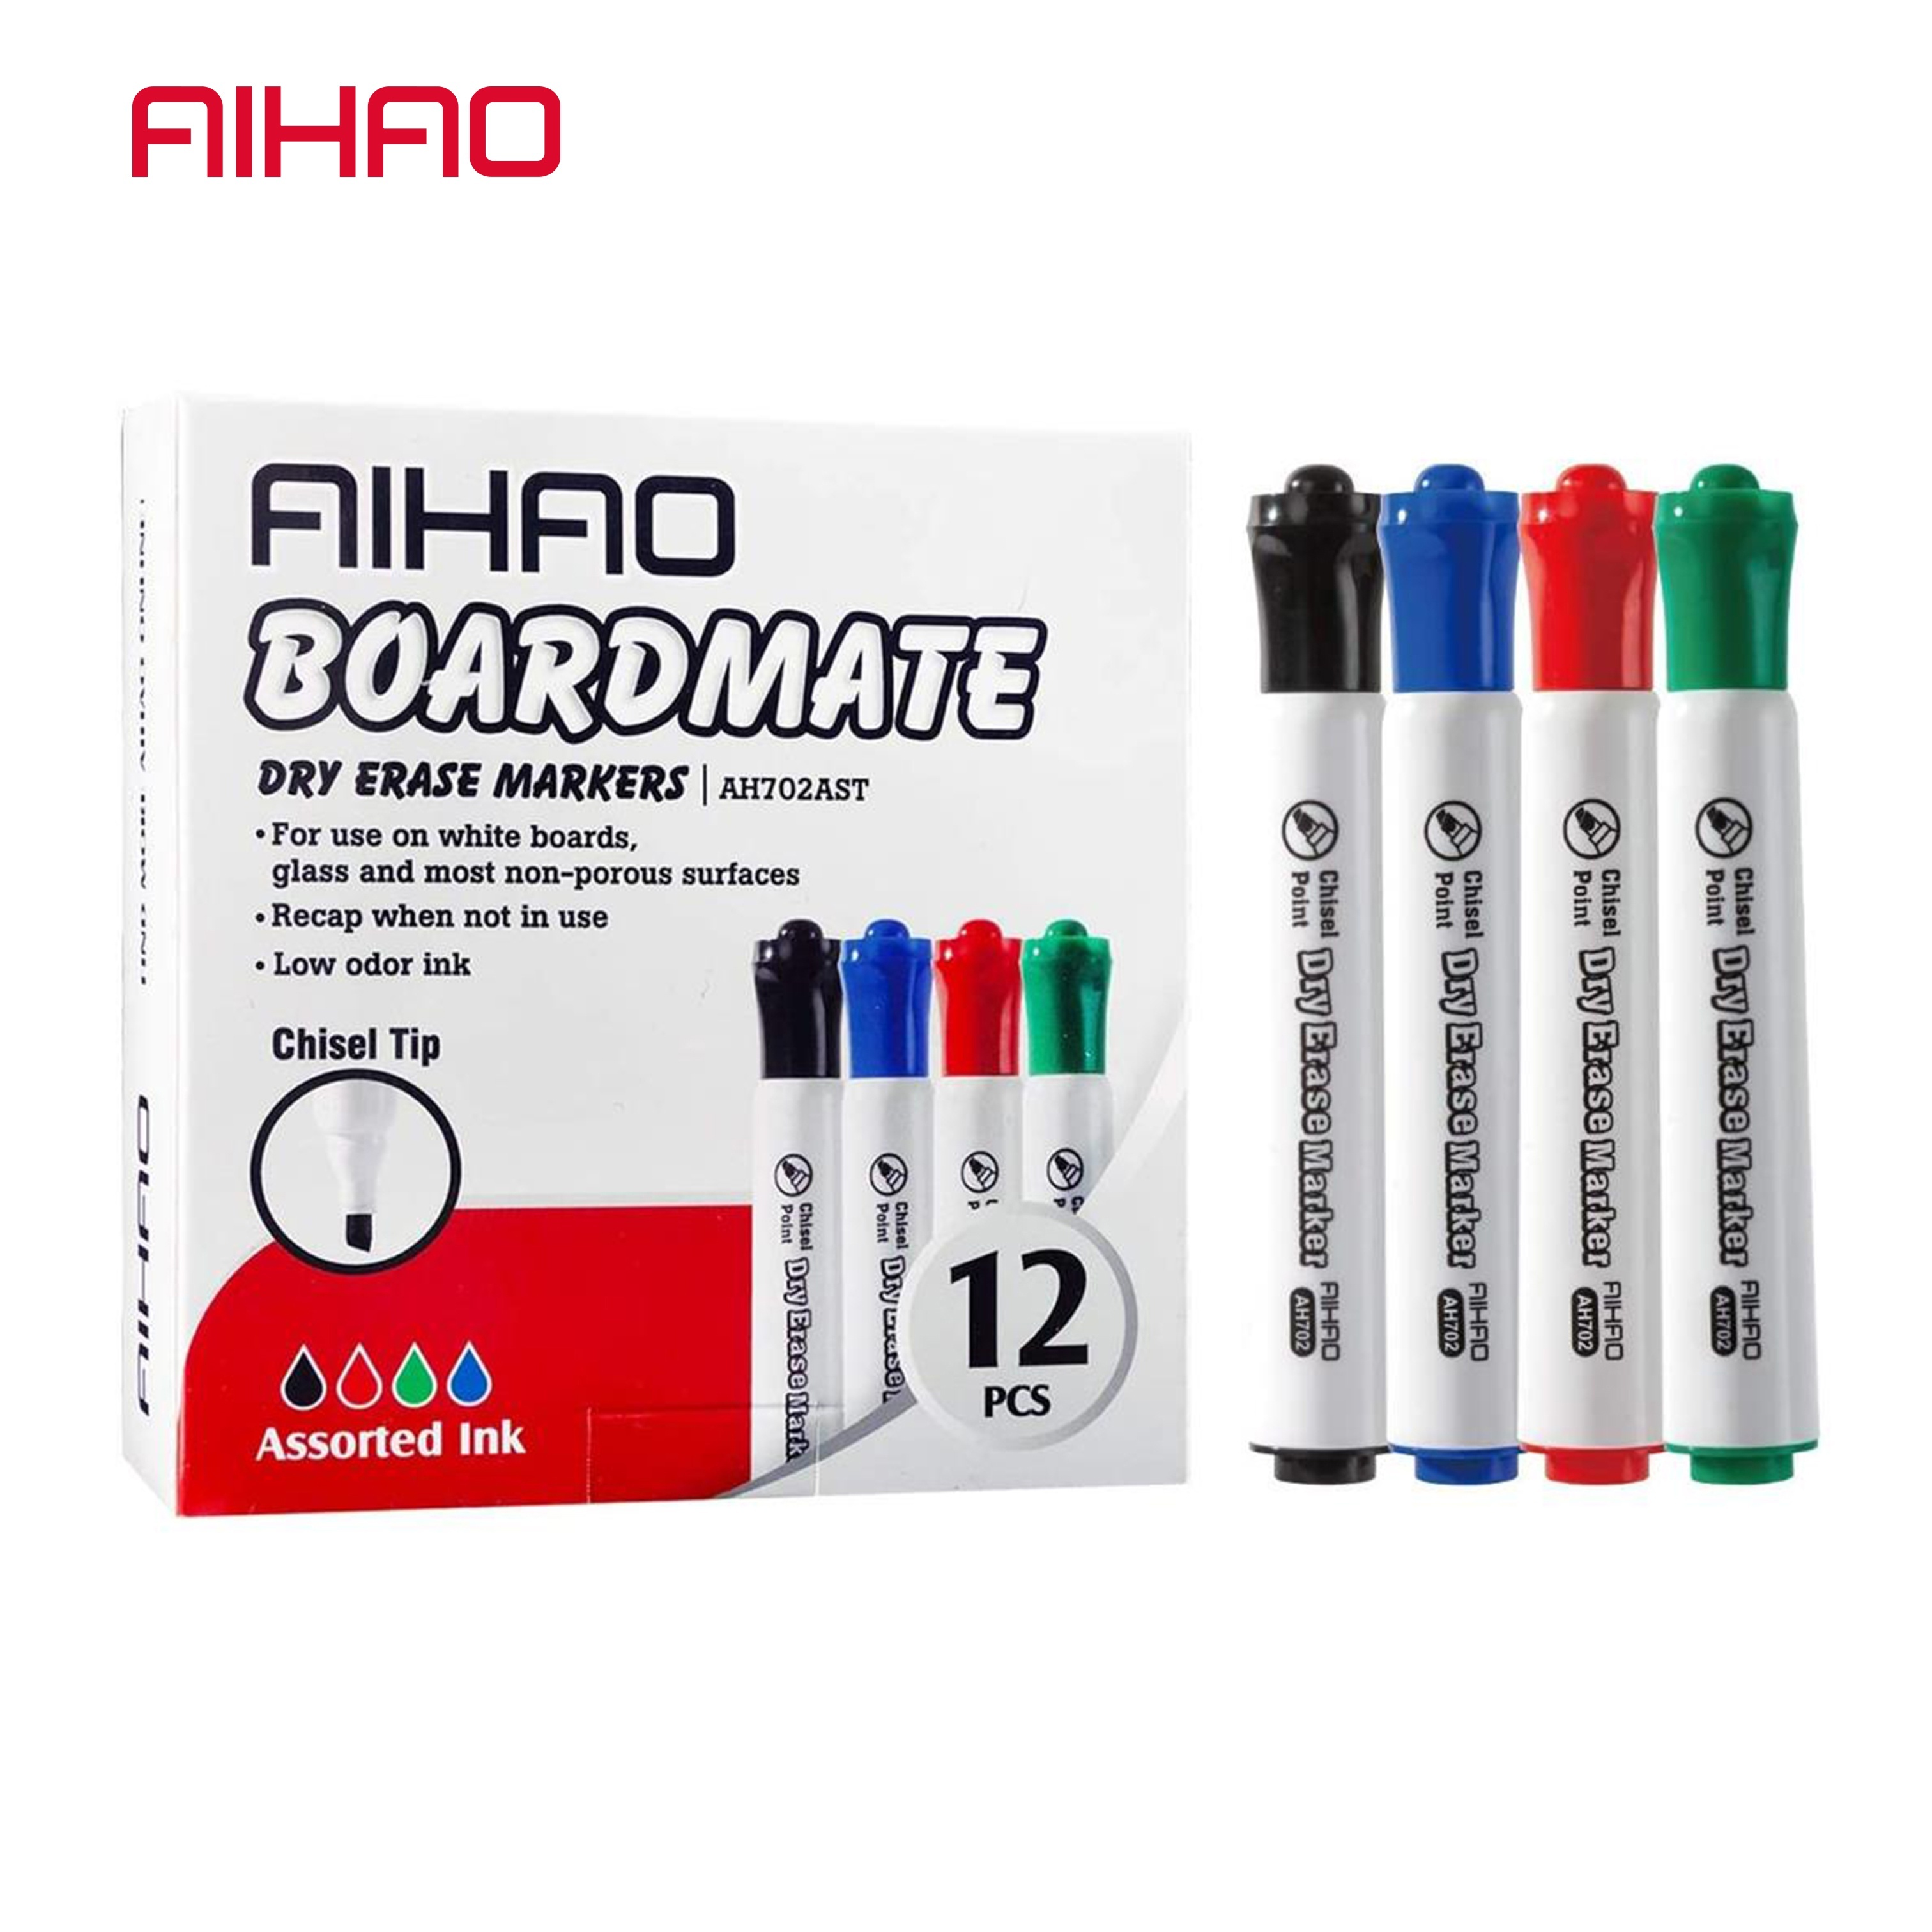 

1 Pack Of 12pcs Aihao Dry Erase Markers, Assorted Colors, Chisel Tip, Whiteboard Marker For School, Office, Home